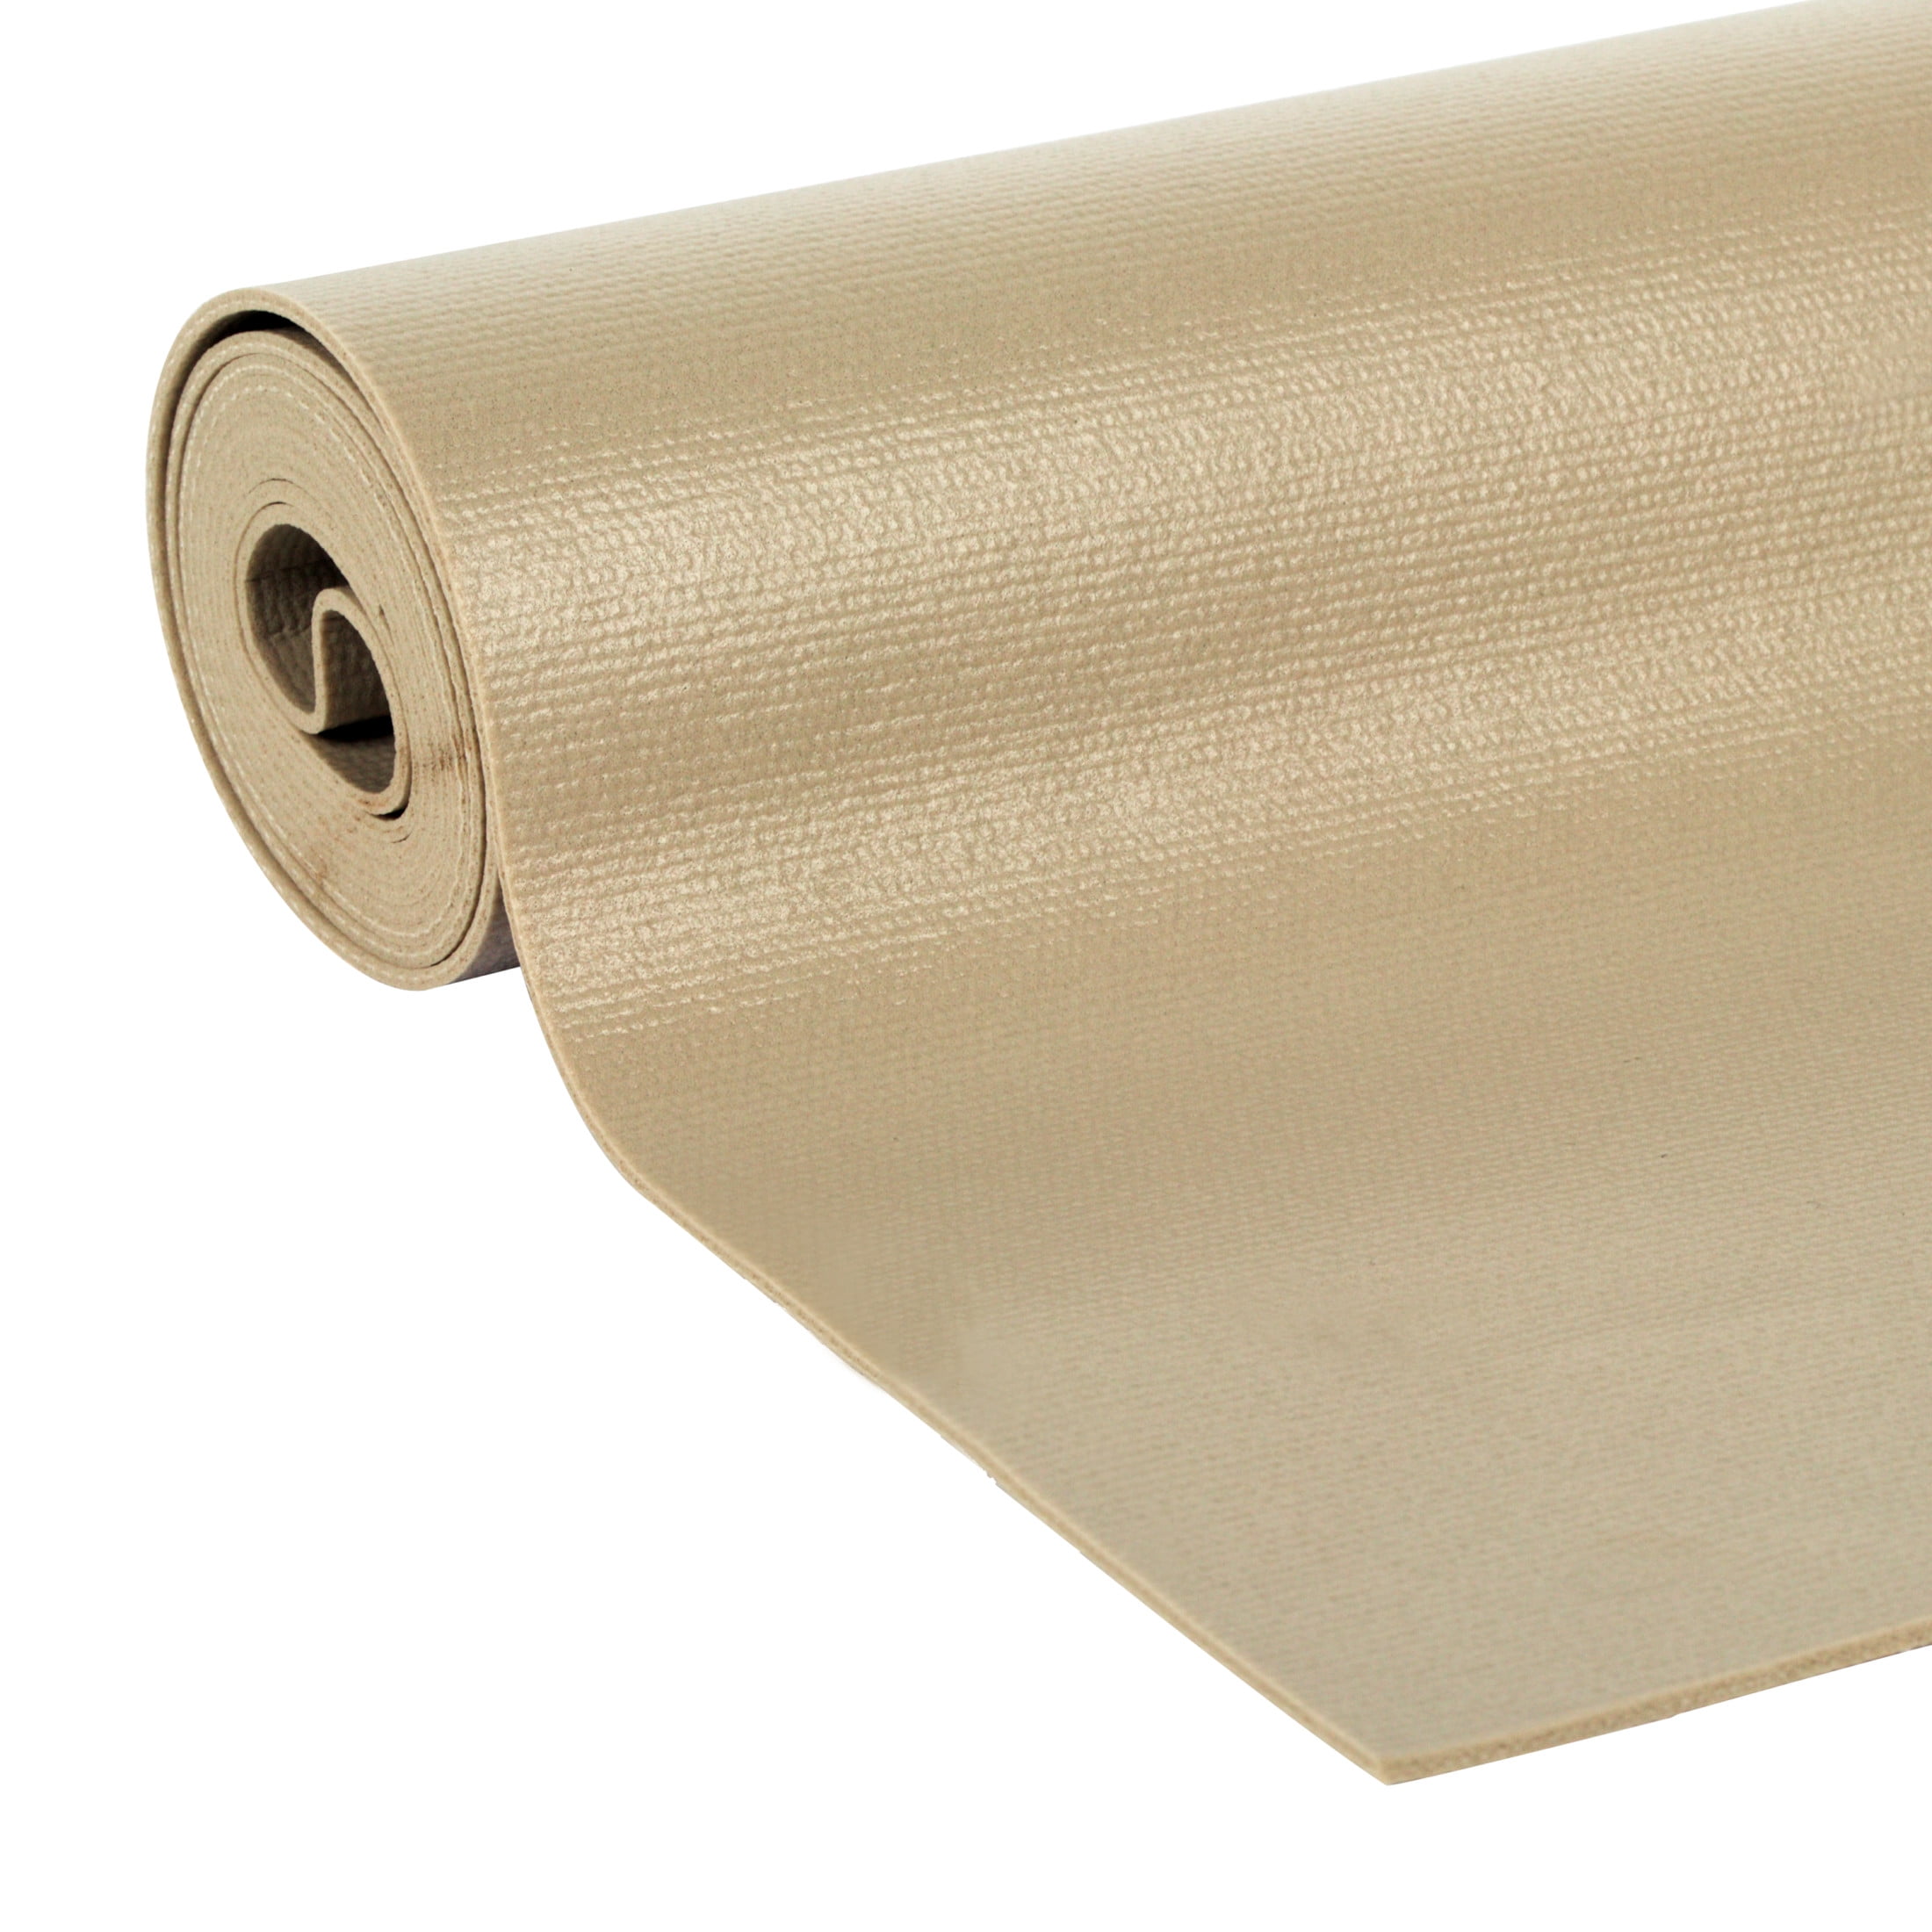 Duck Brand Solid Grip Easy Liner Shelf Liner, 20 in. x 4 ft., Taupe 